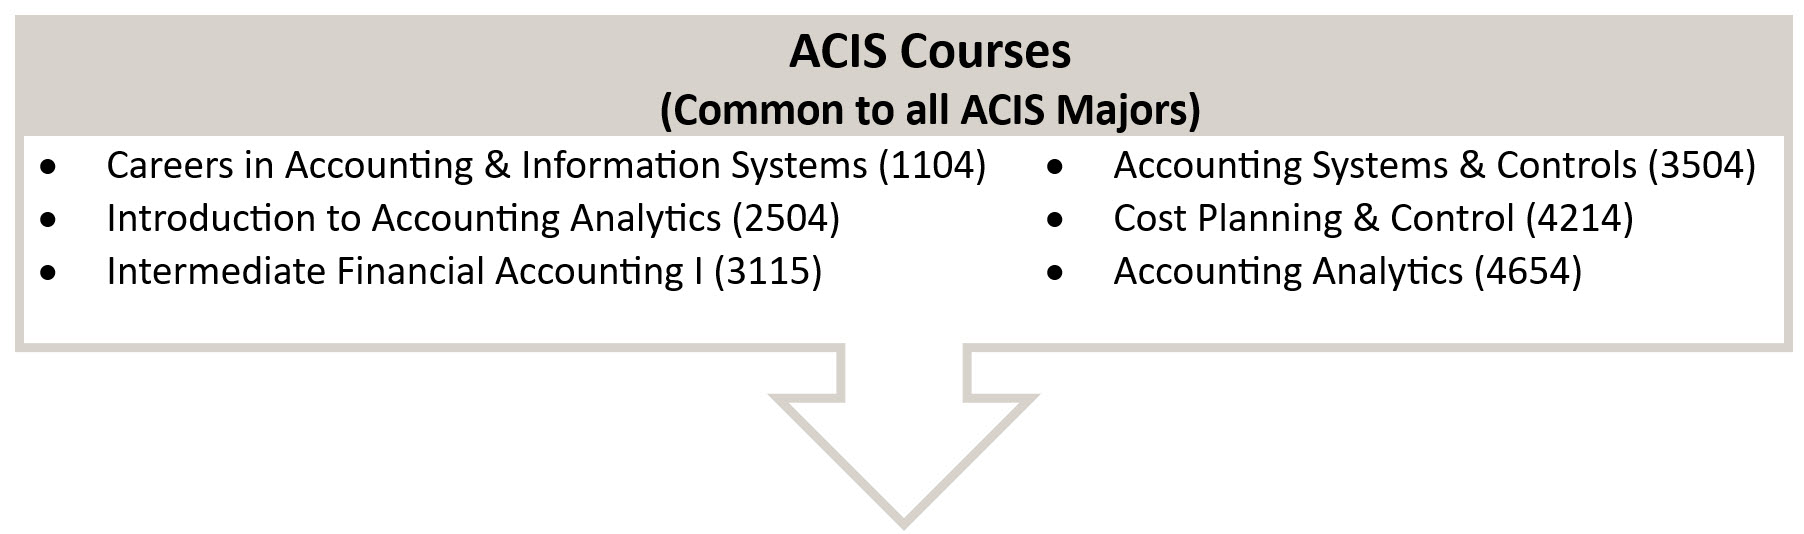 ACIS courses common to all programs:  1104, 2504, 3115, 3504, 4212 and 4654.